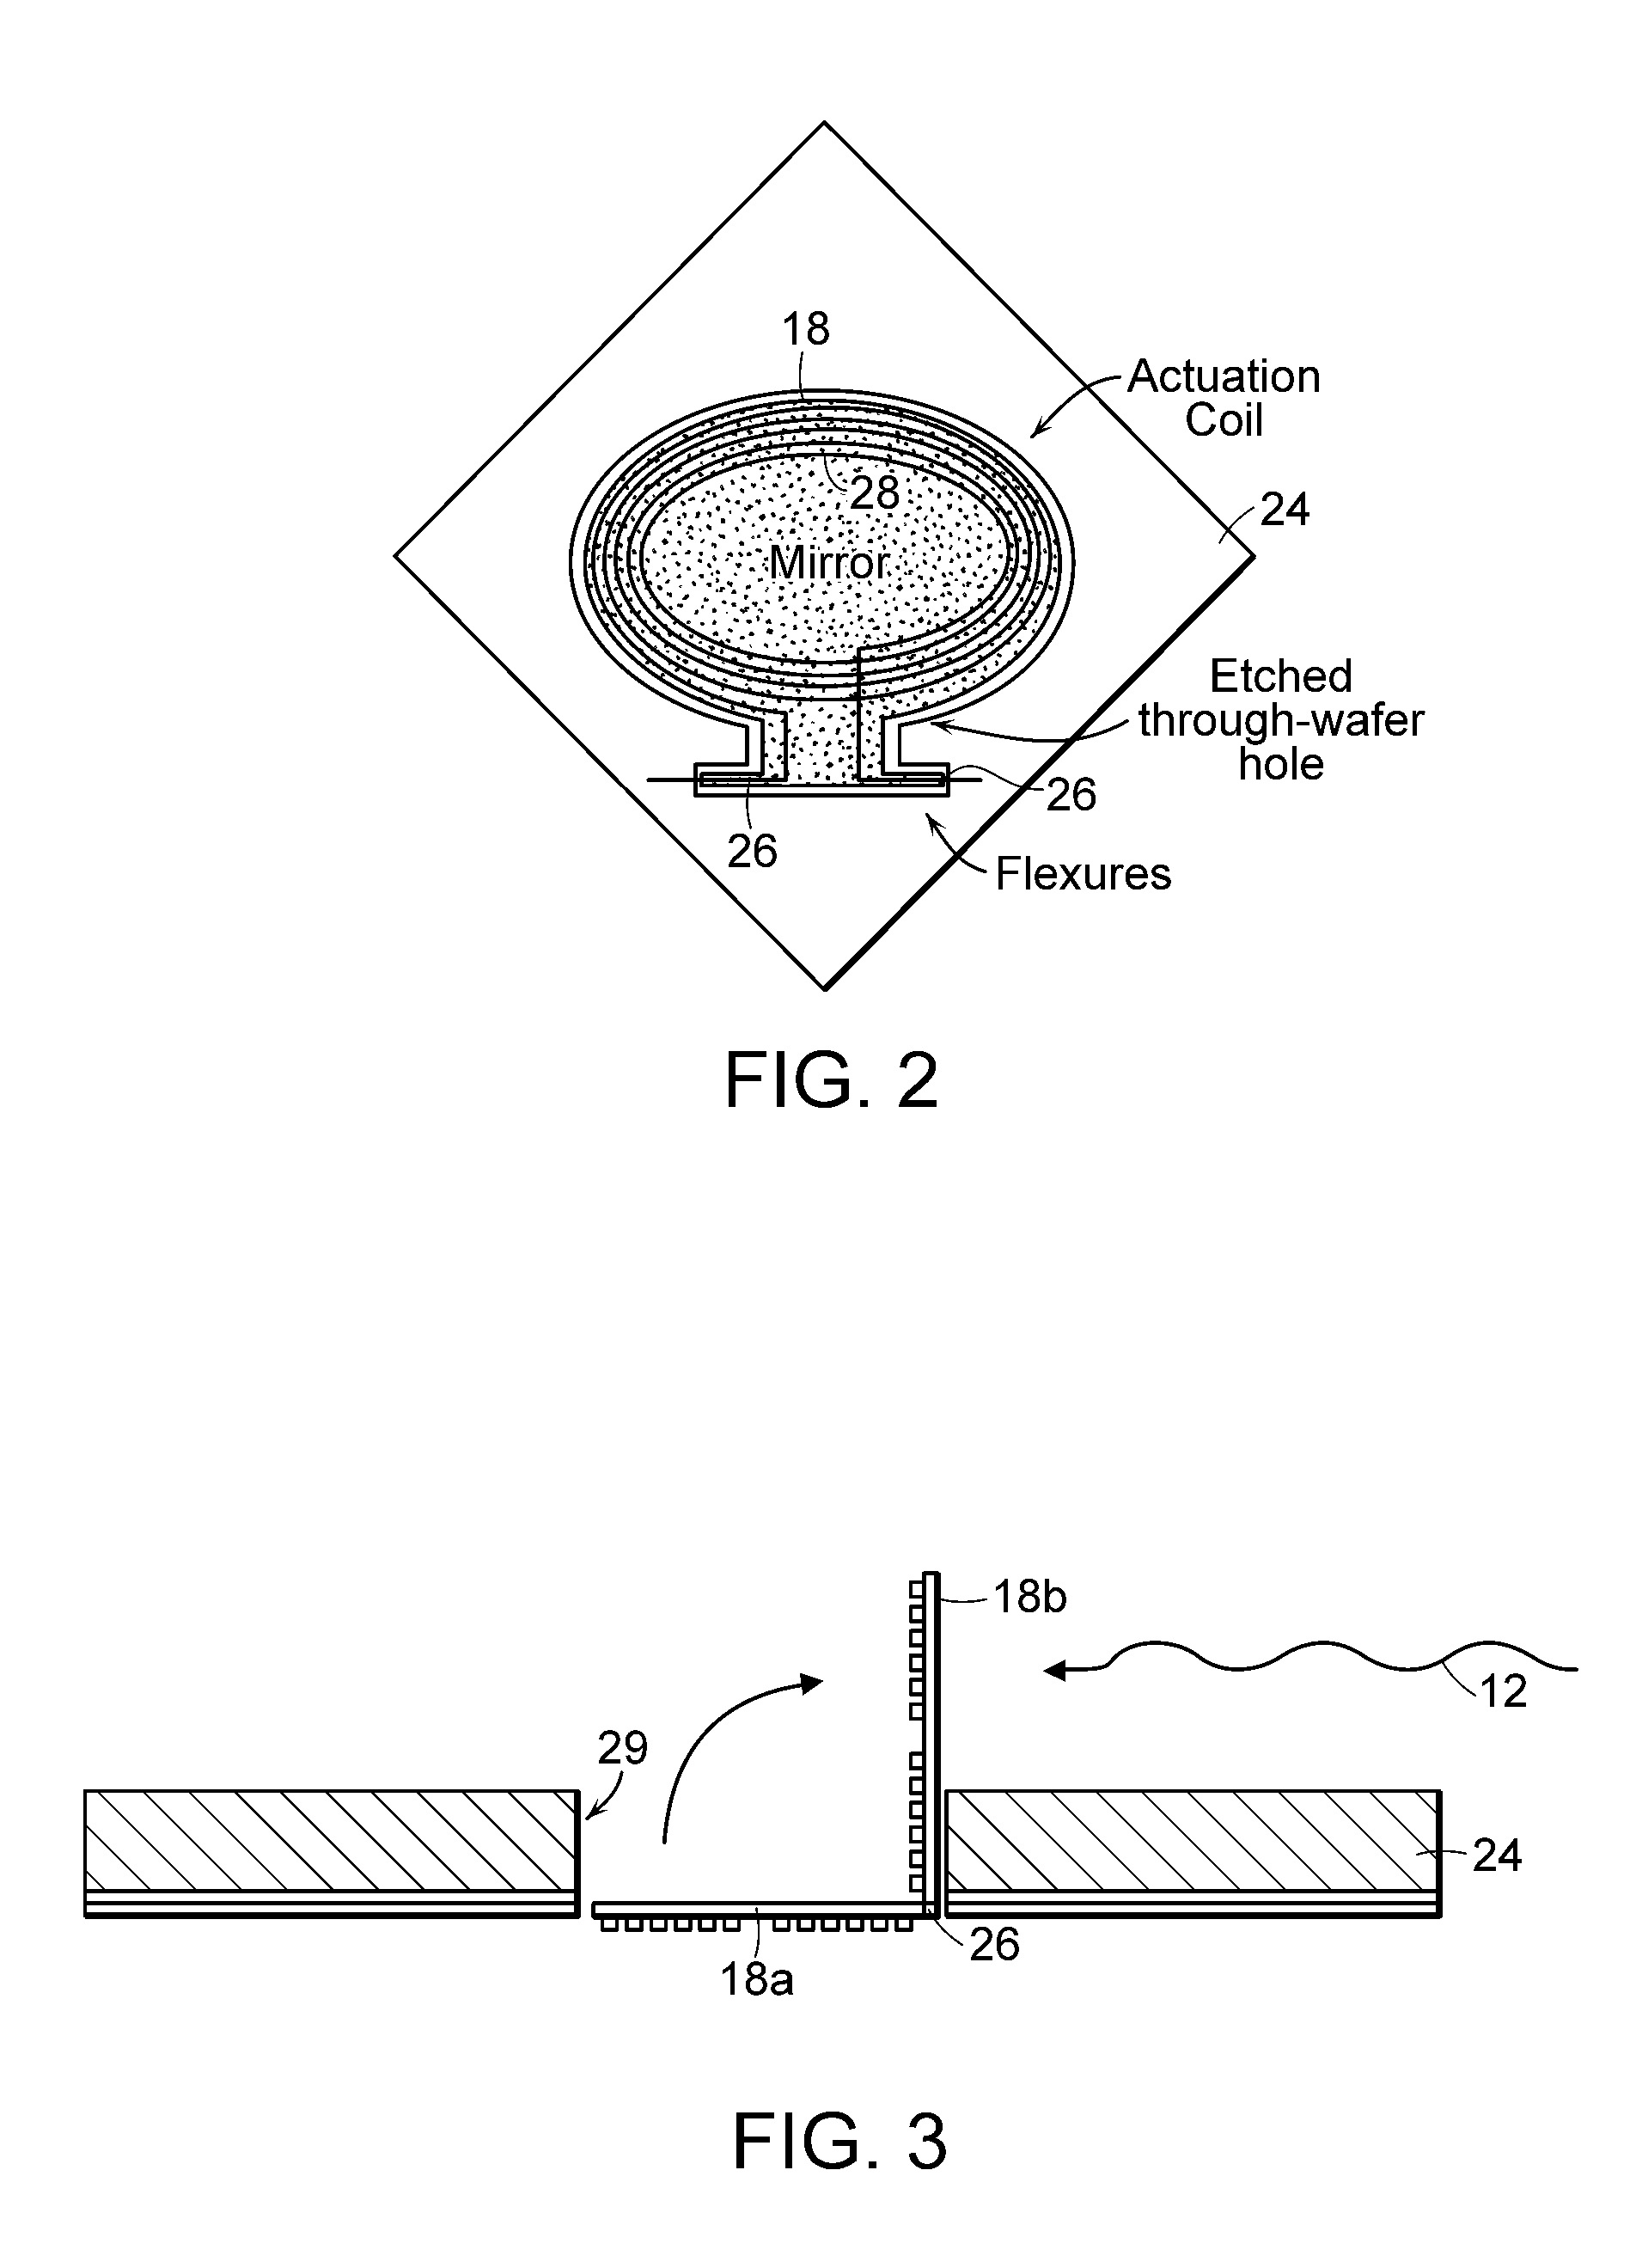 Latching mechanism for magnetically actuated micro-electro-mechanical devices